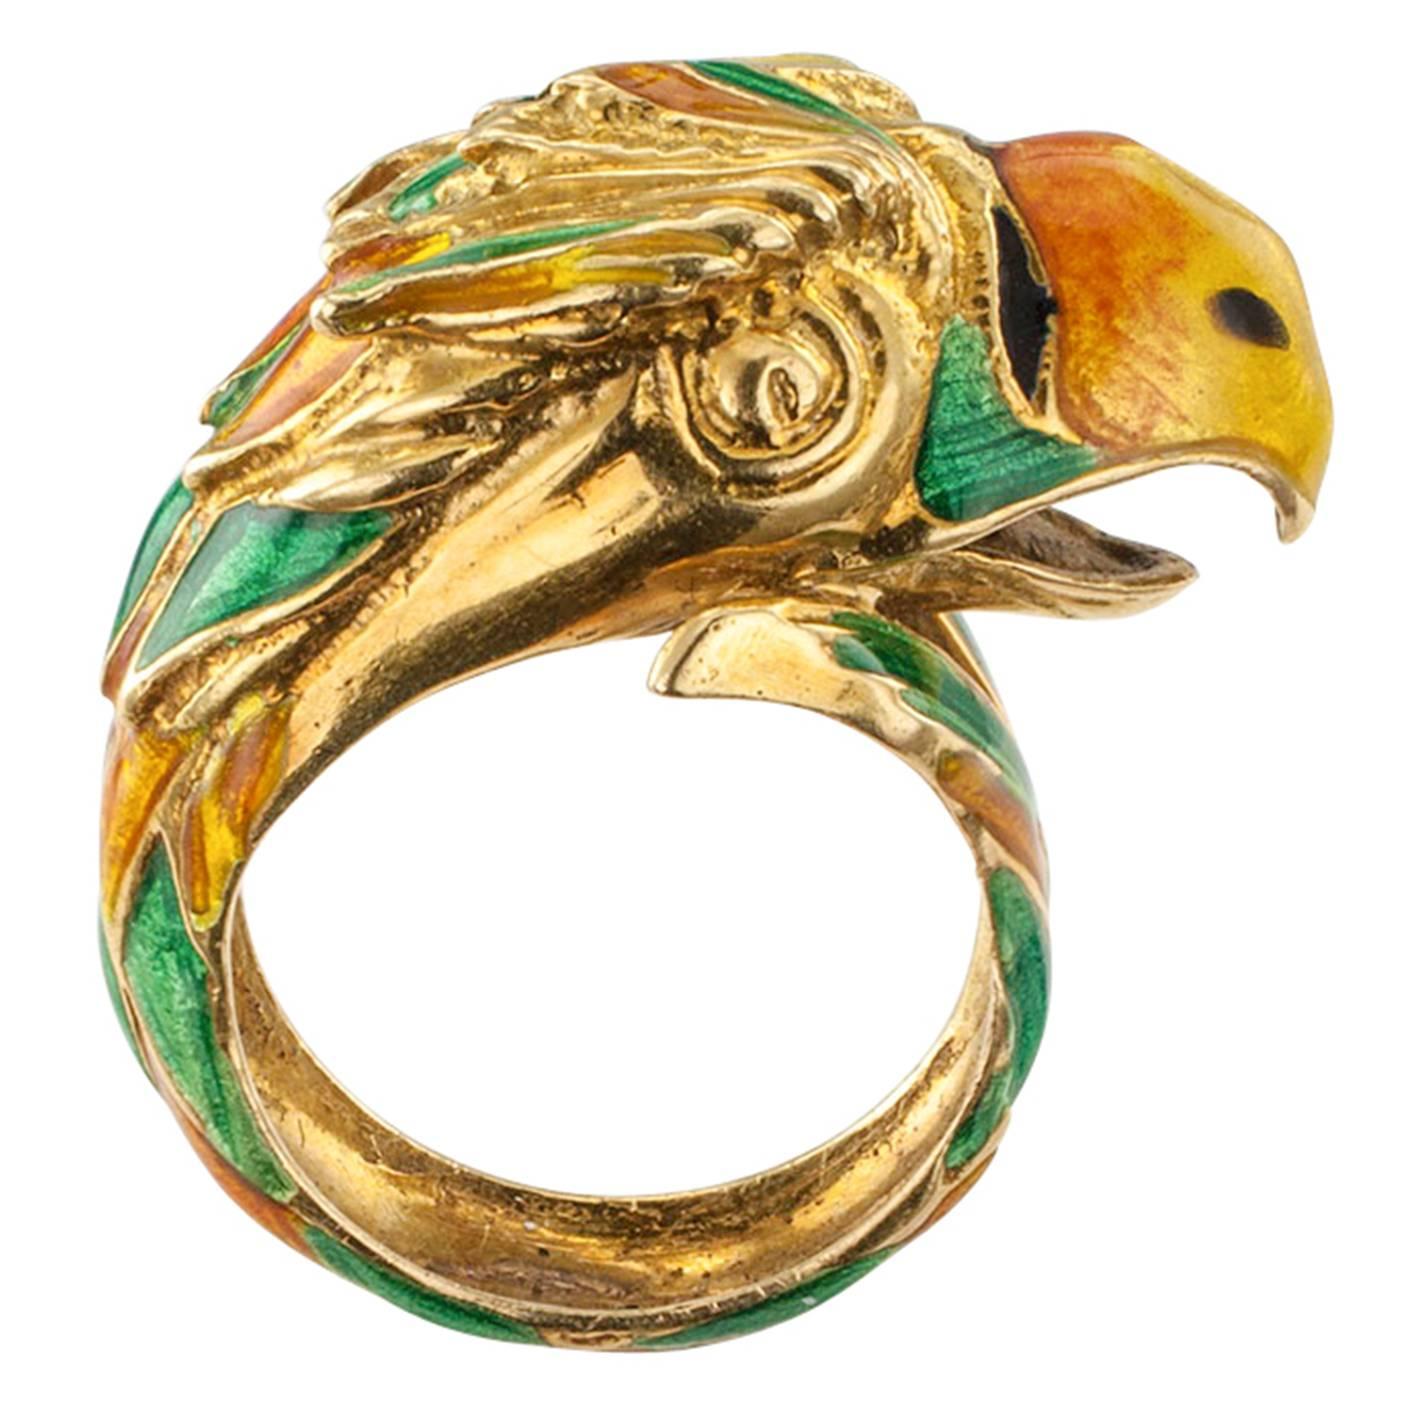 1970s Enamel and Gold Parrot Ring